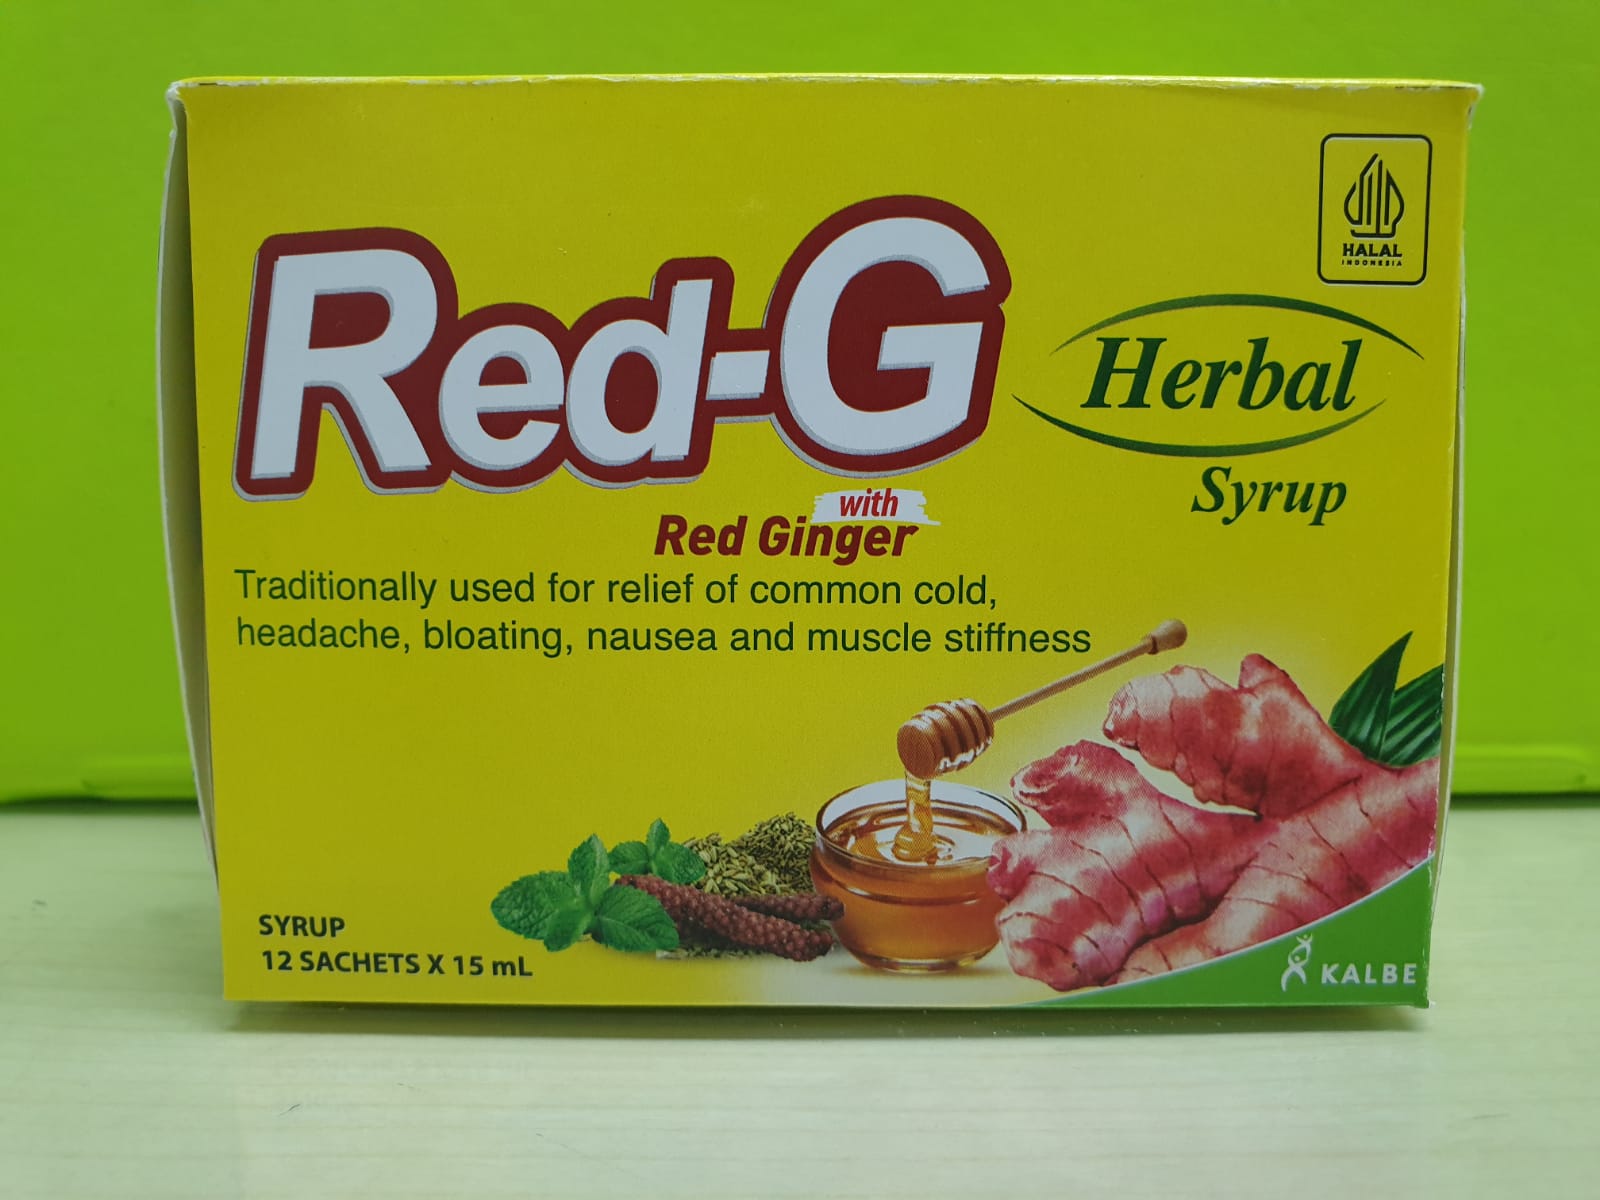 Red-G Herbal Syrup.jpeg